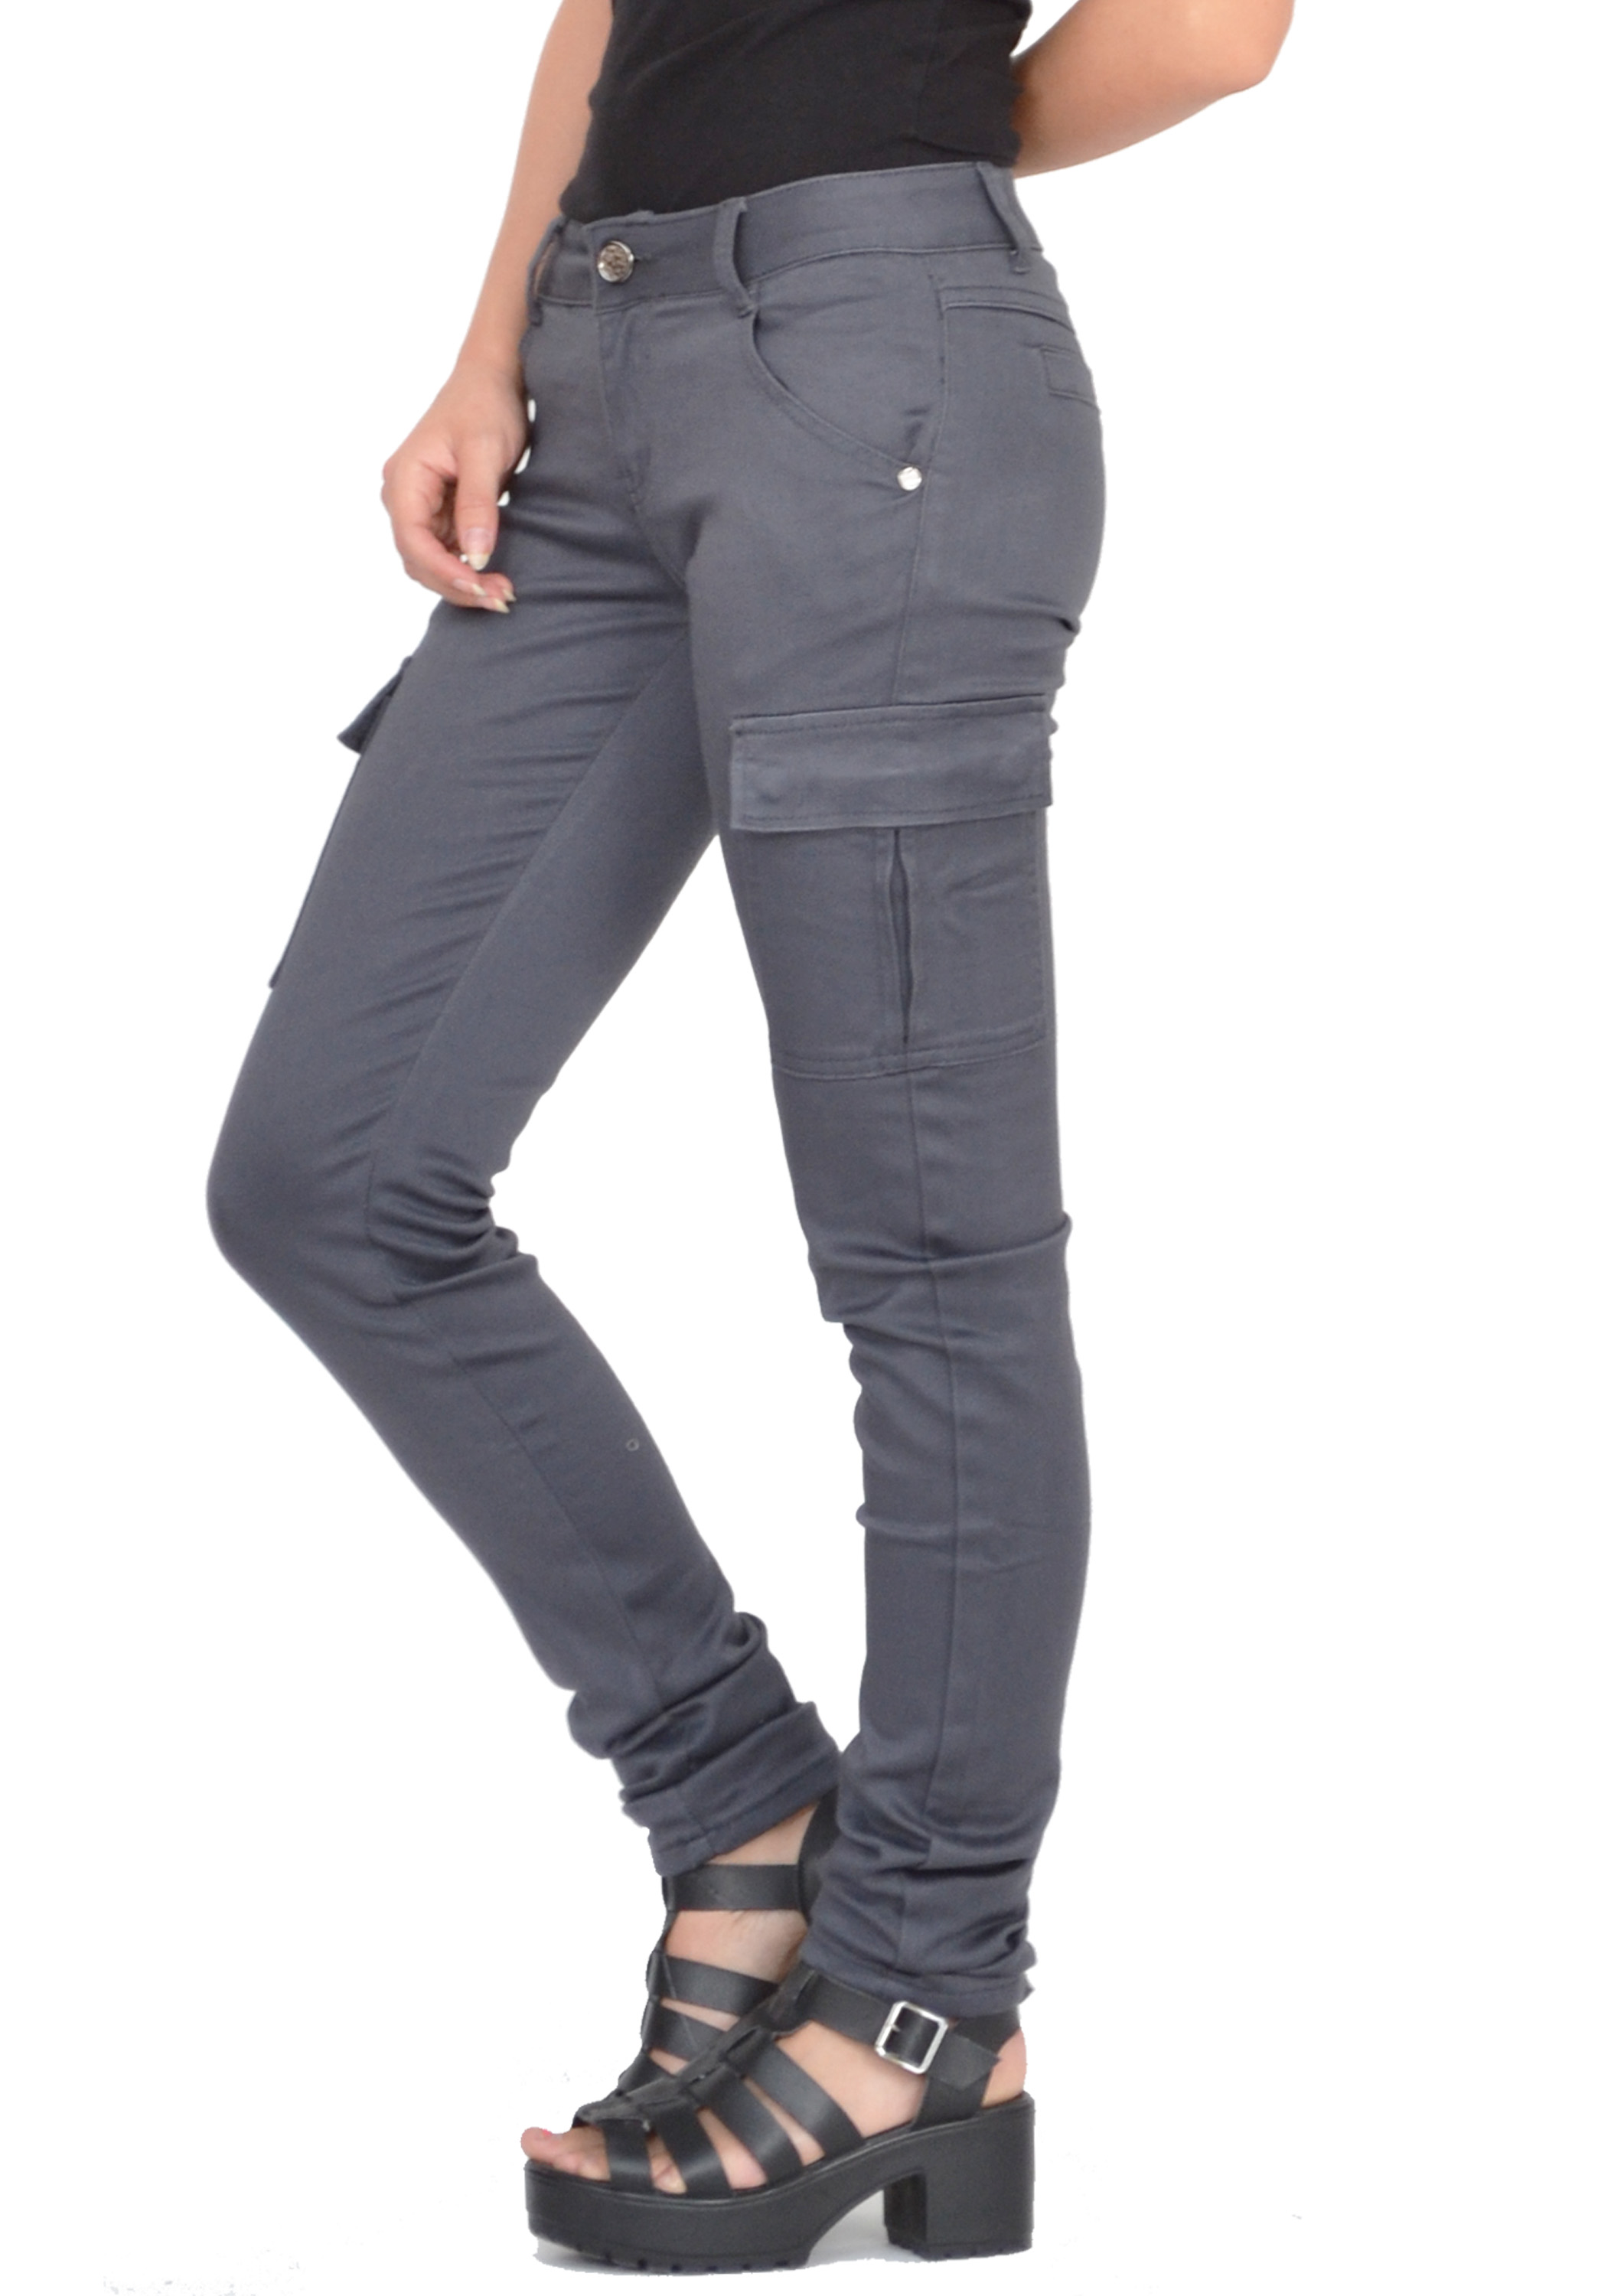 New Womens Grey Slim Fitted Combat Pants Skinny Cargo Trousers ...